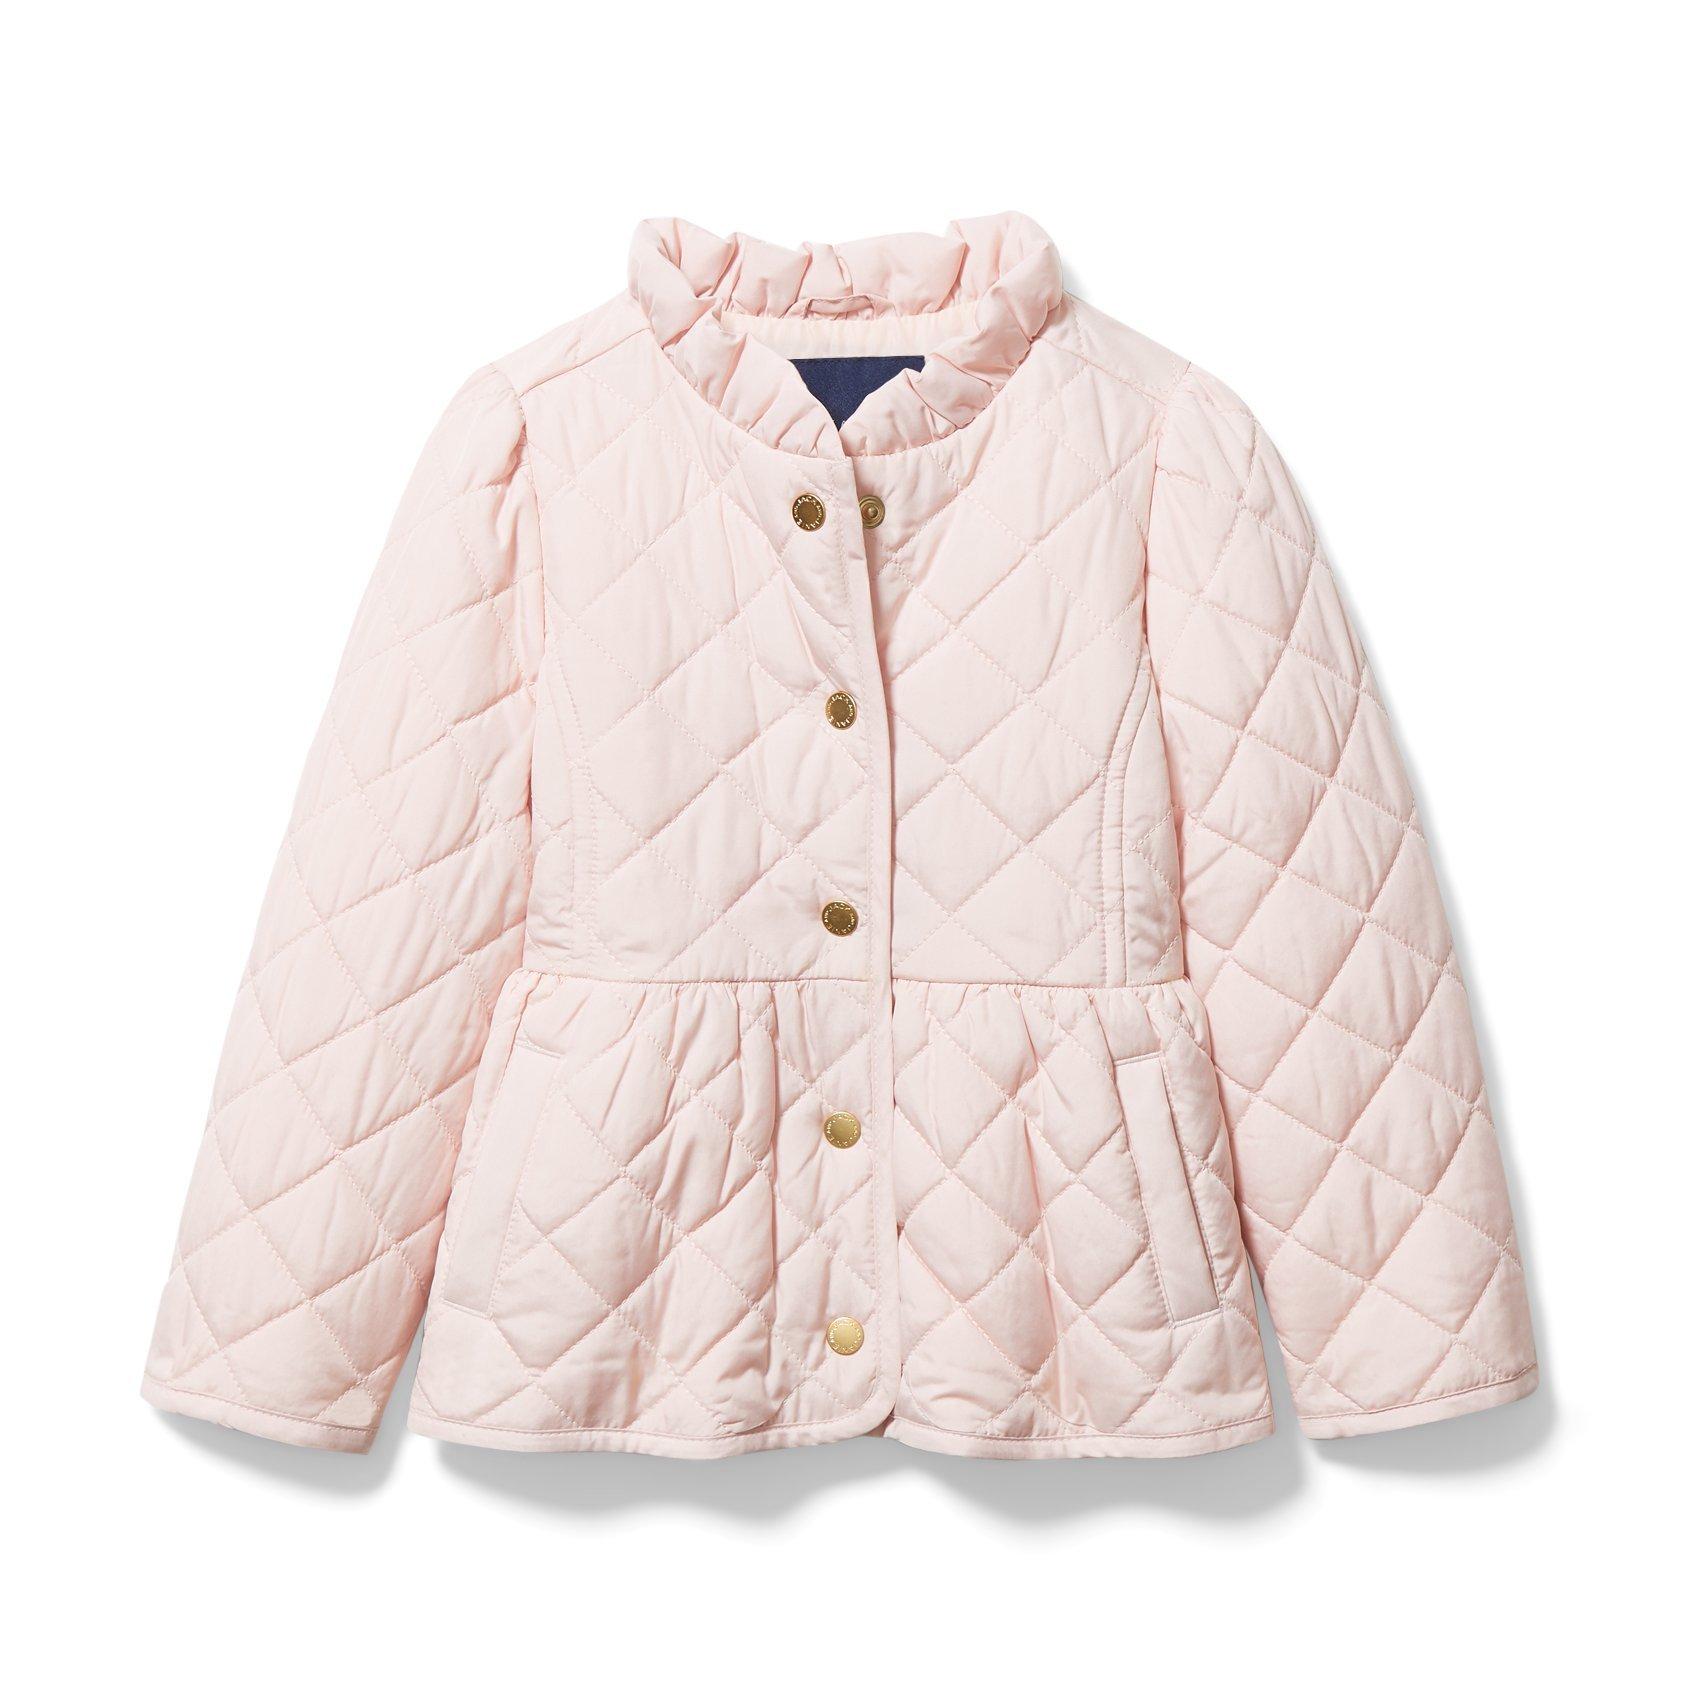 Girl Cloud Pink Quilted Peplum Barn Jacket by Janie and Jack